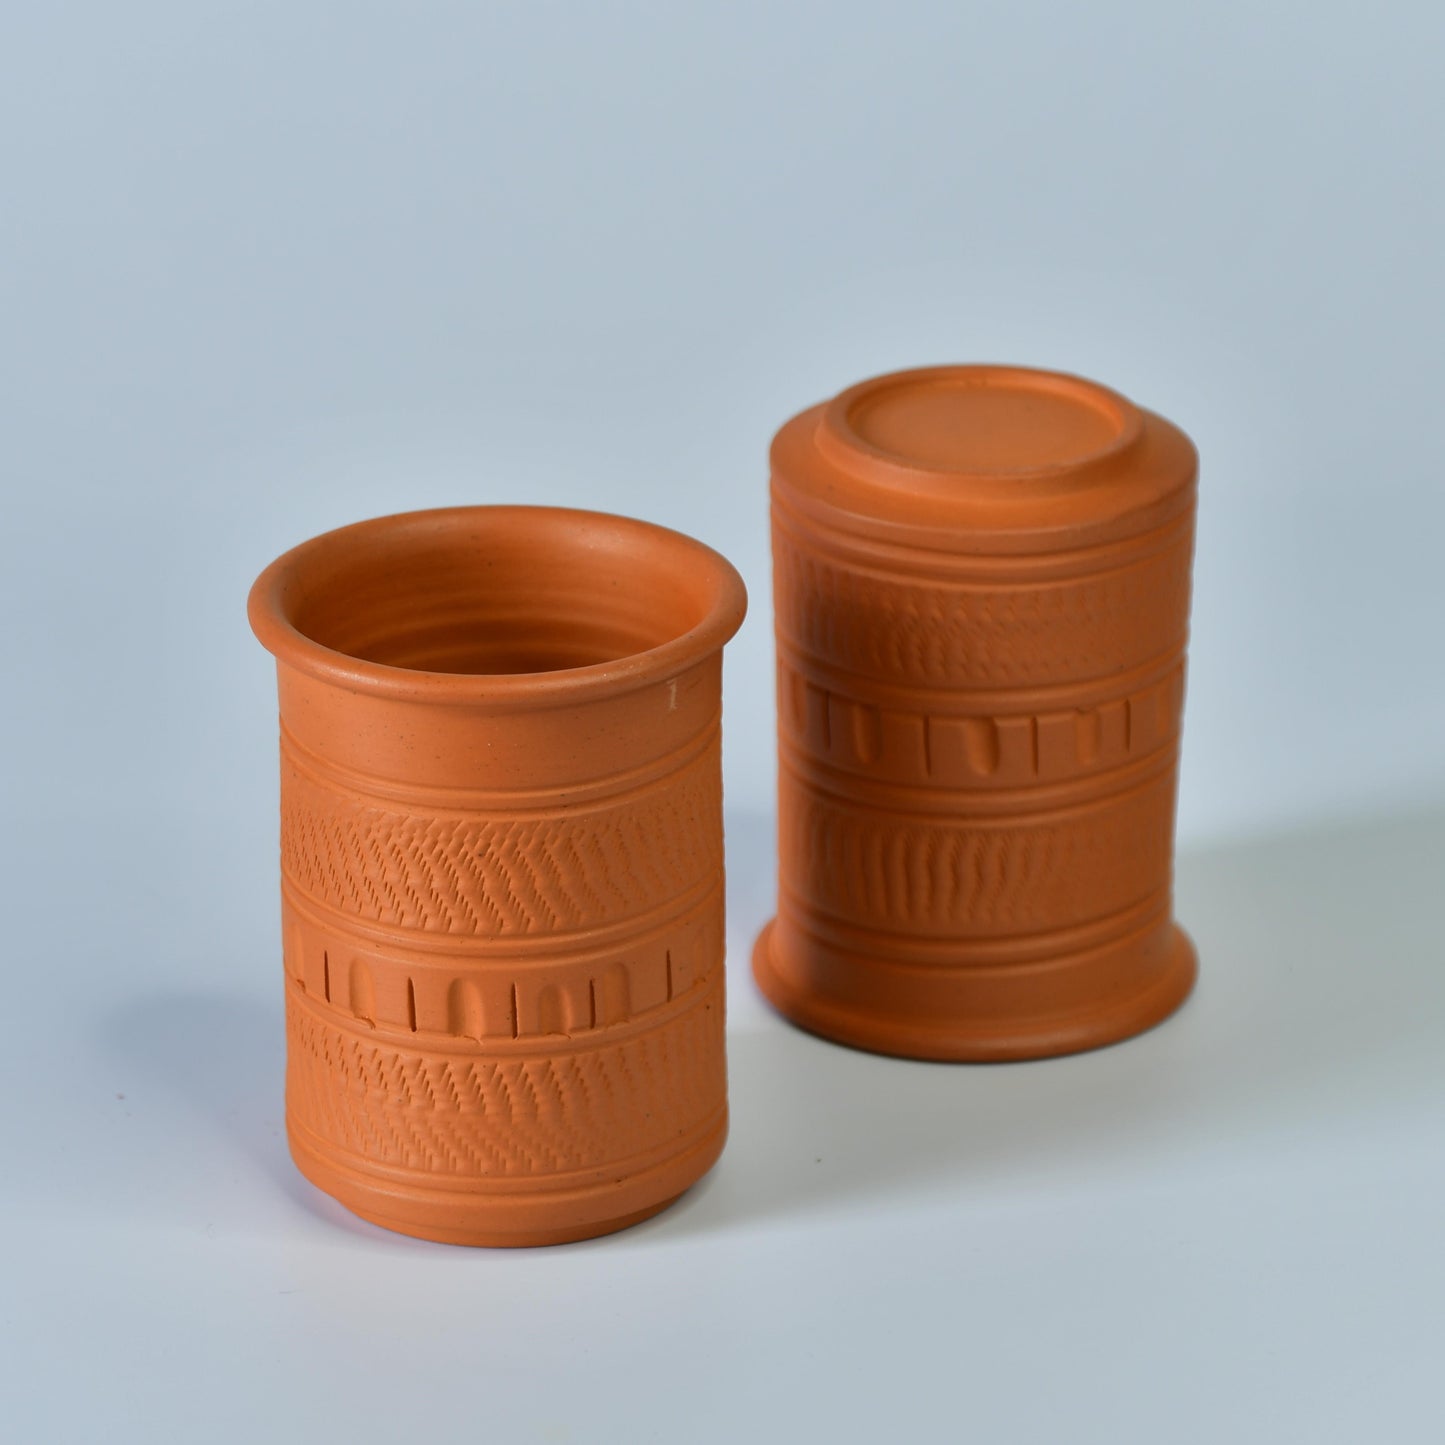 Sowpeace Terracotta Water Glass: Artful, Functional Home & Kitchenware